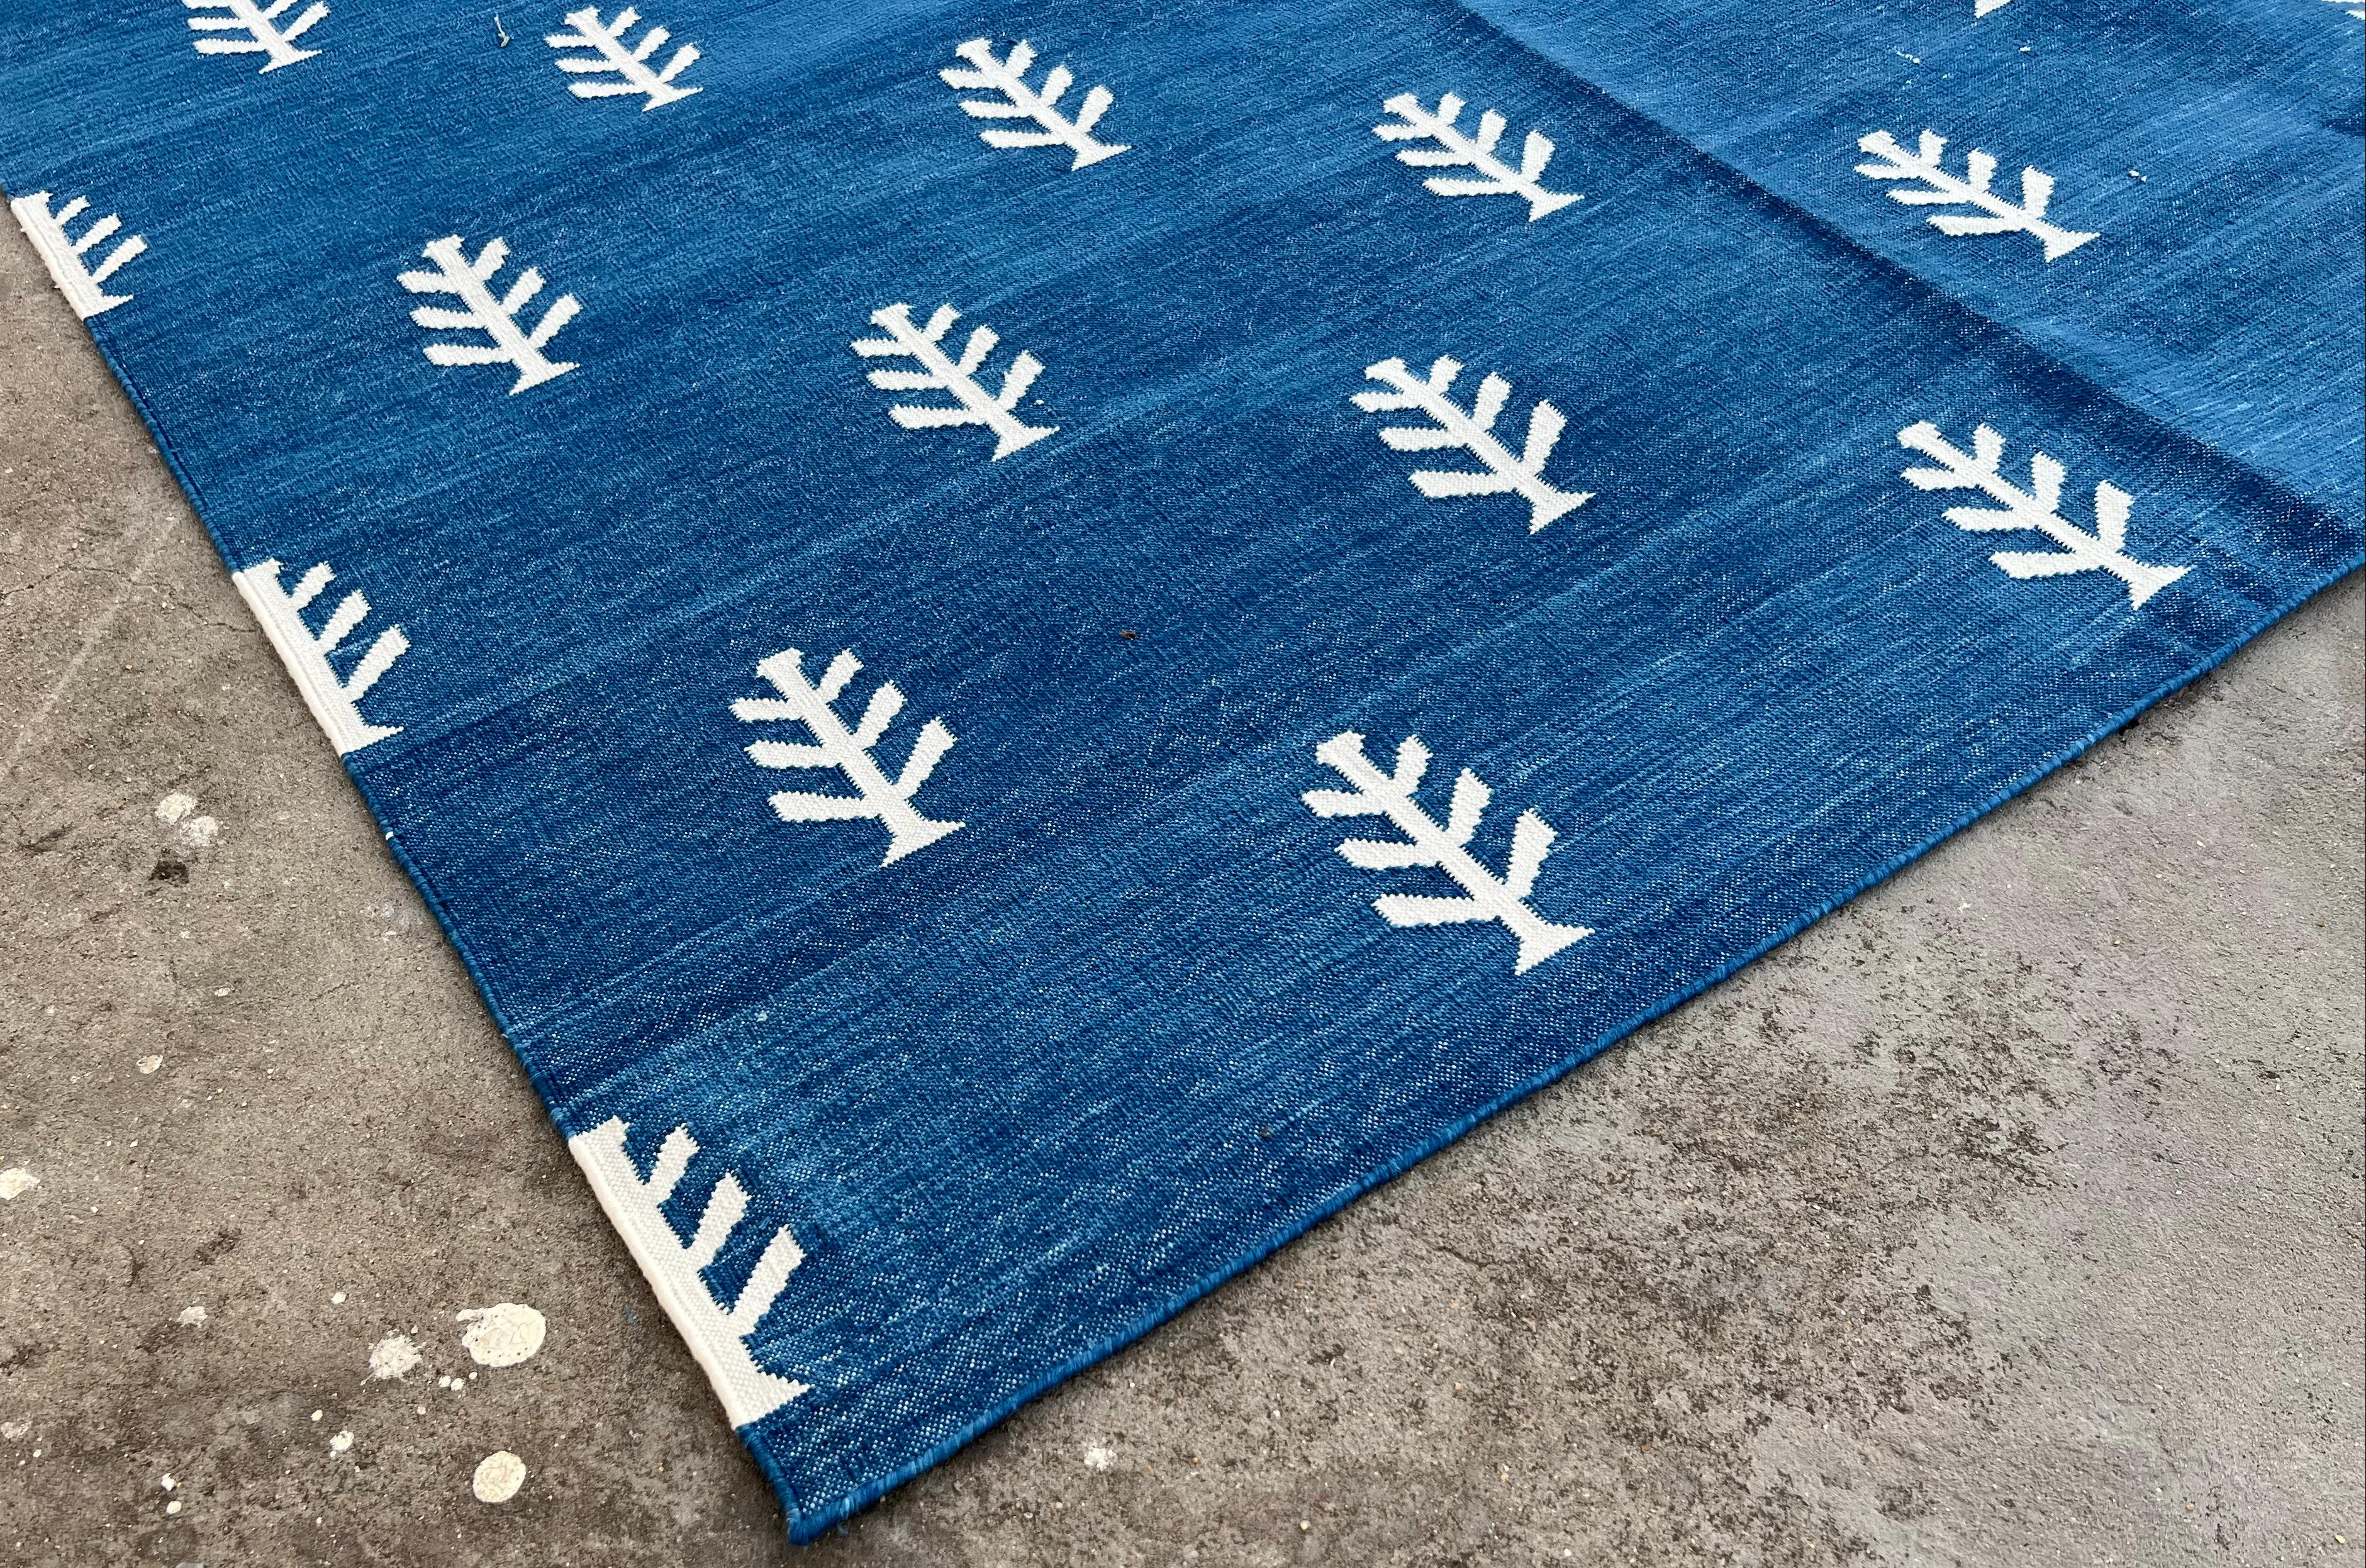 Hand-Woven Handmade Cotton Area Flat Weave Rug, Blue And White Leaf Pattern Indian Dhurrie For Sale